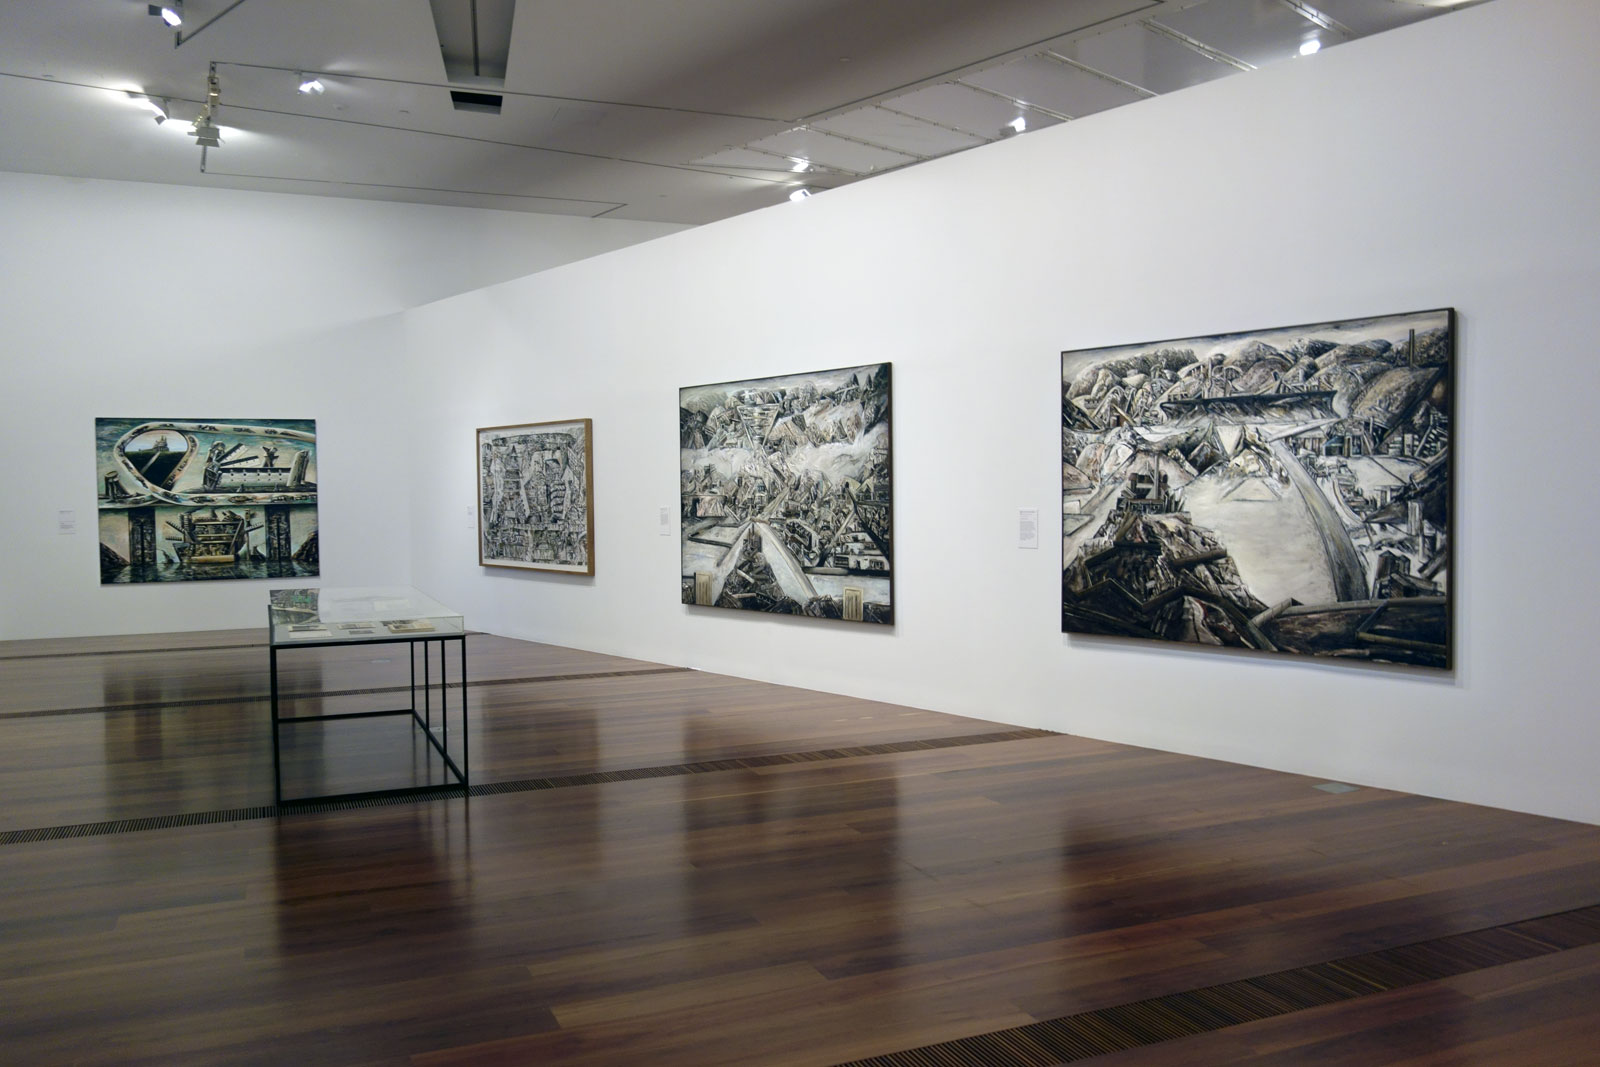 Installation view of the exhibition 'Jan Senbergs: Observation – Imagination' at The Ian Potter Centre: NGV Australia with 'Sticht's view to the smelters 1' at right